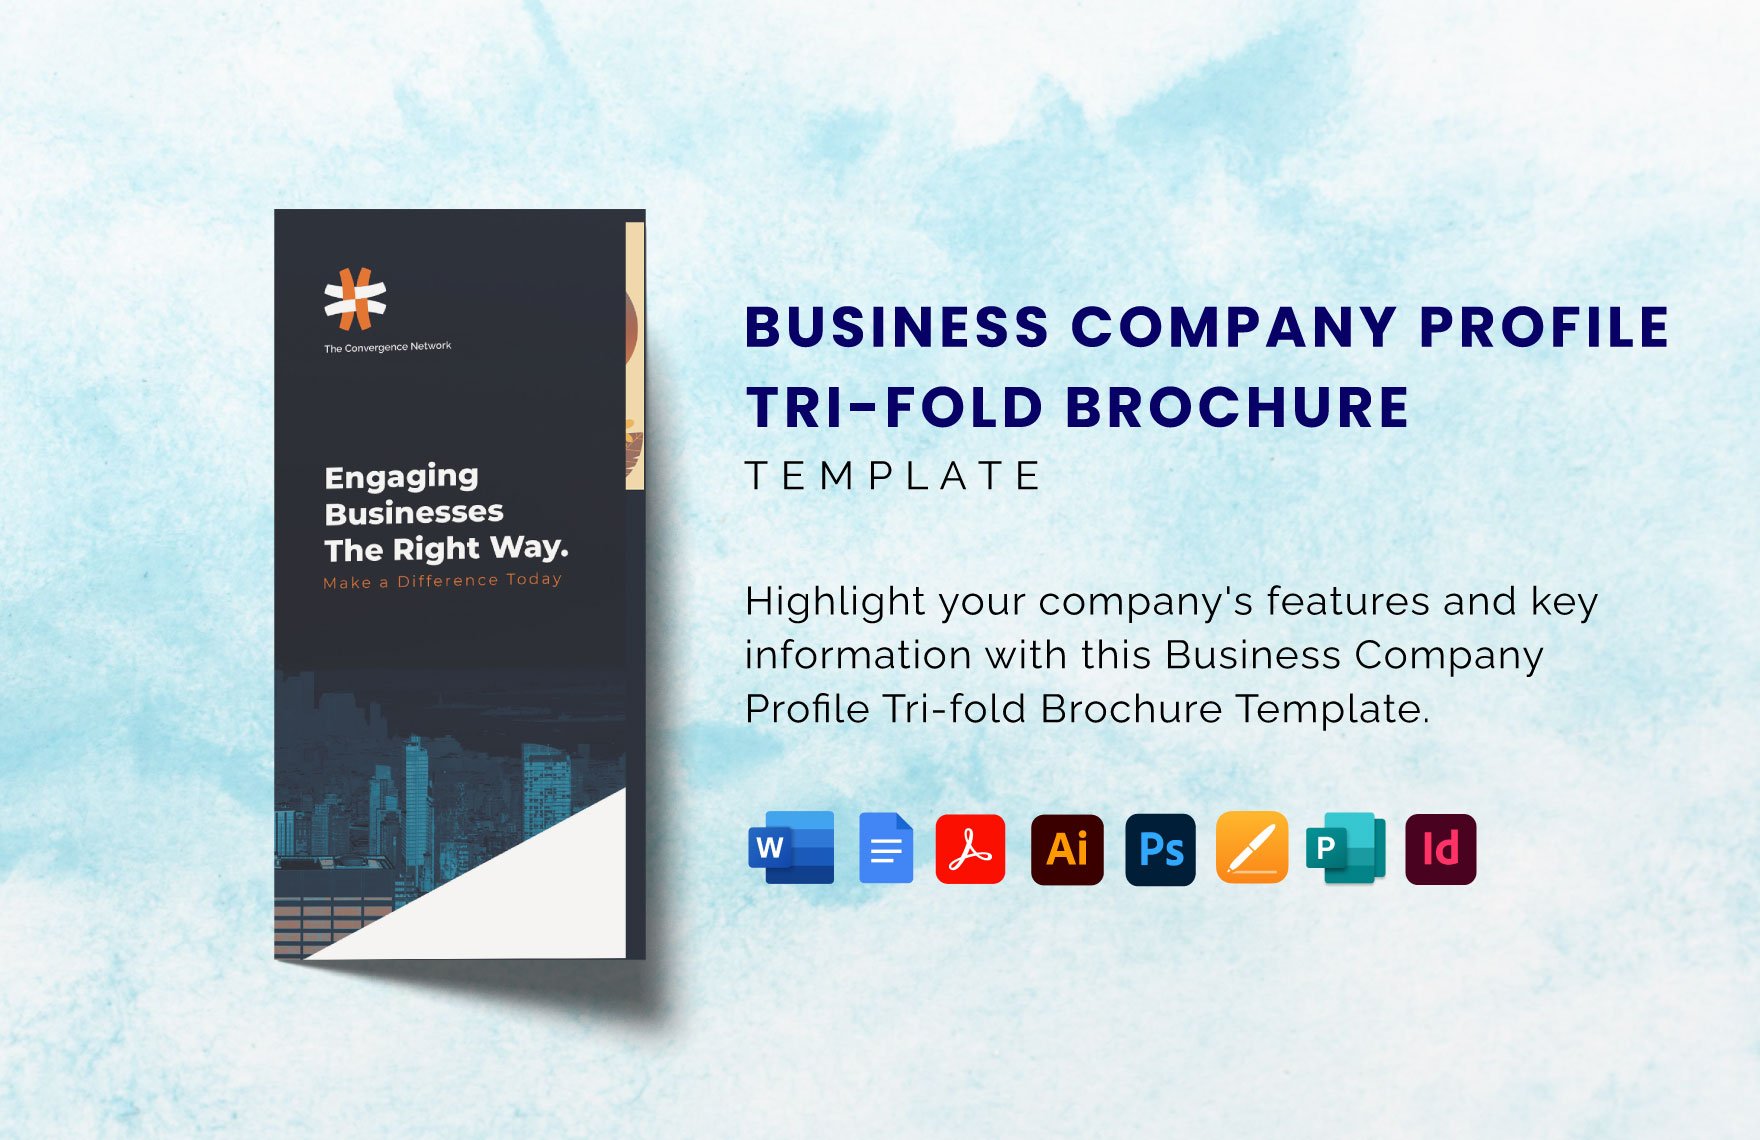 Business Company Profile Tri-fold Brochure Template in Word, Google Docs, PDF, Illustrator, PSD, Apple Pages, Publisher, InDesign